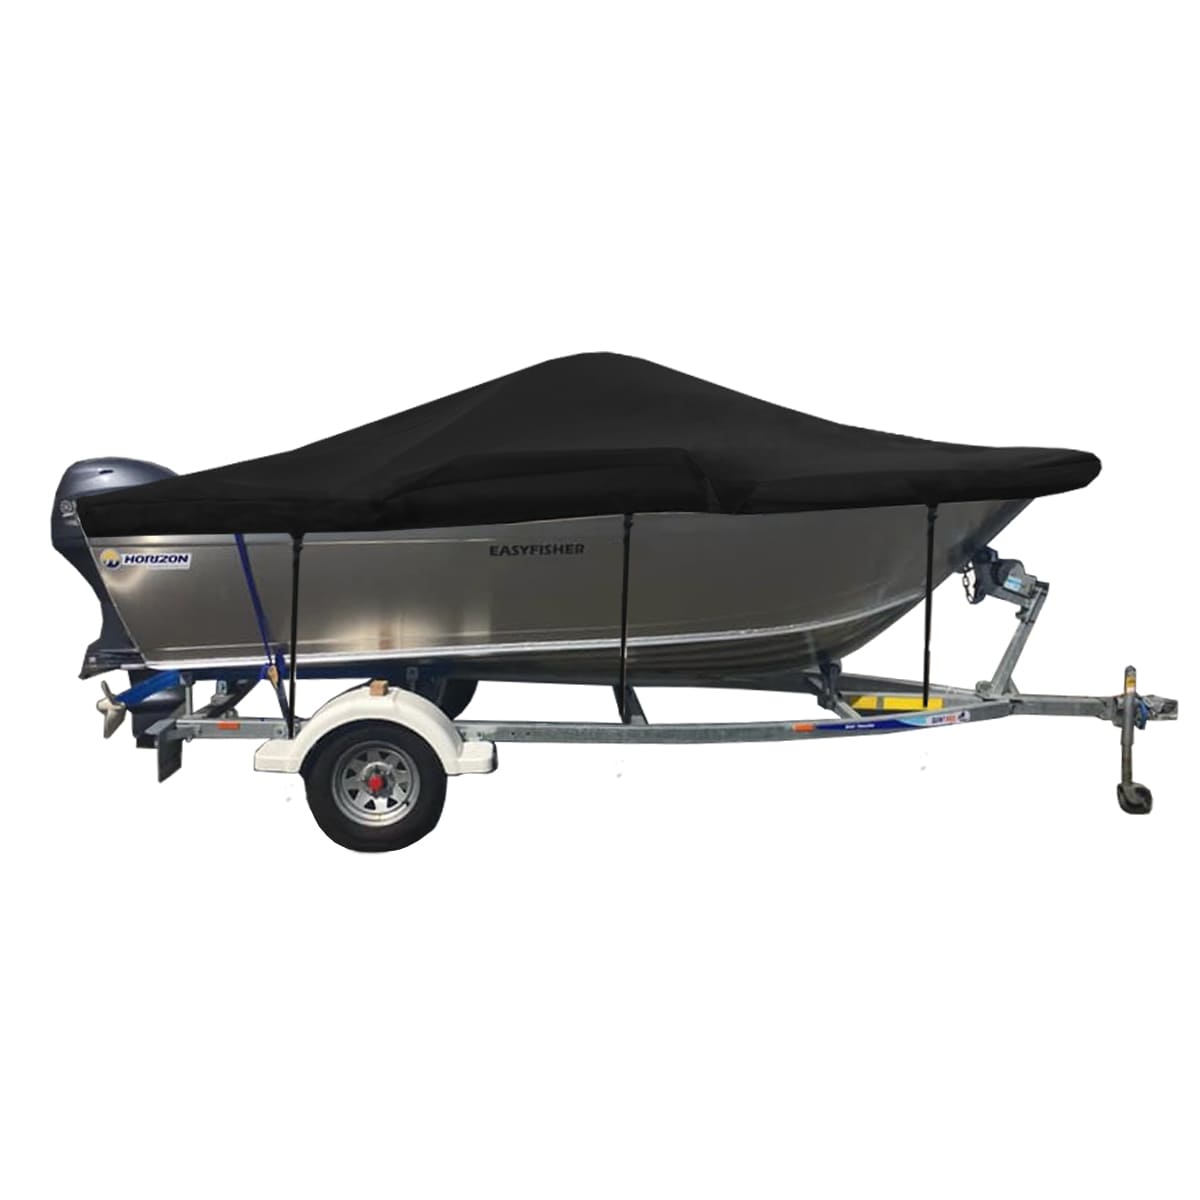 Custom Boat Covers for Horizon 415 EASYFISHER SIDE CONSOLE BOAT - Oceansouth